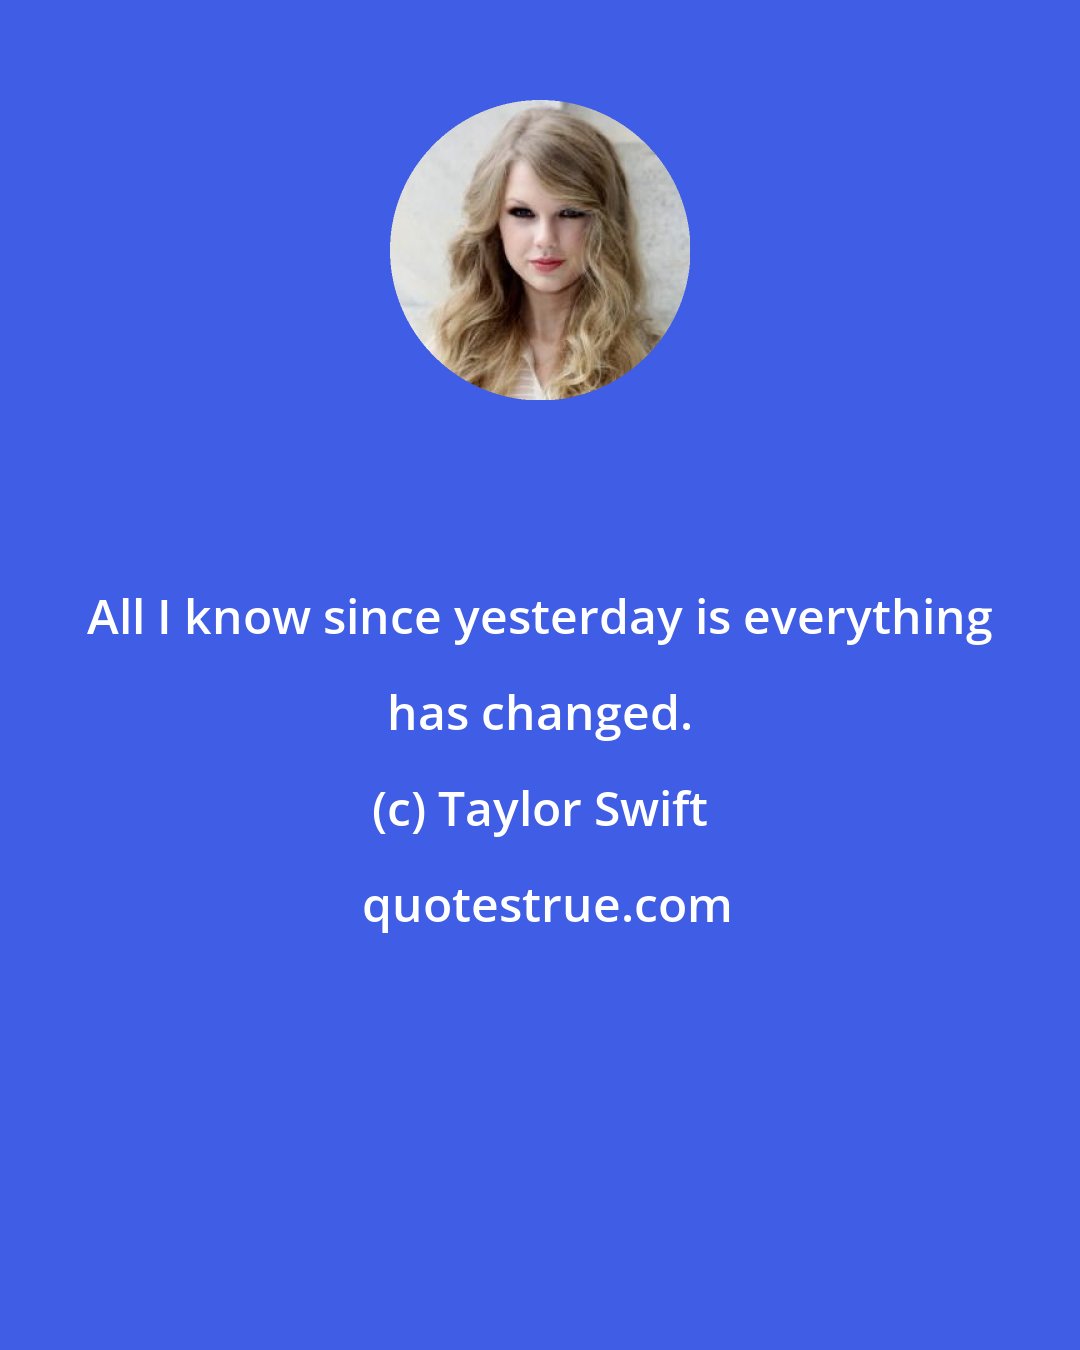 Taylor Swift: All I know since yesterday is everything has changed.